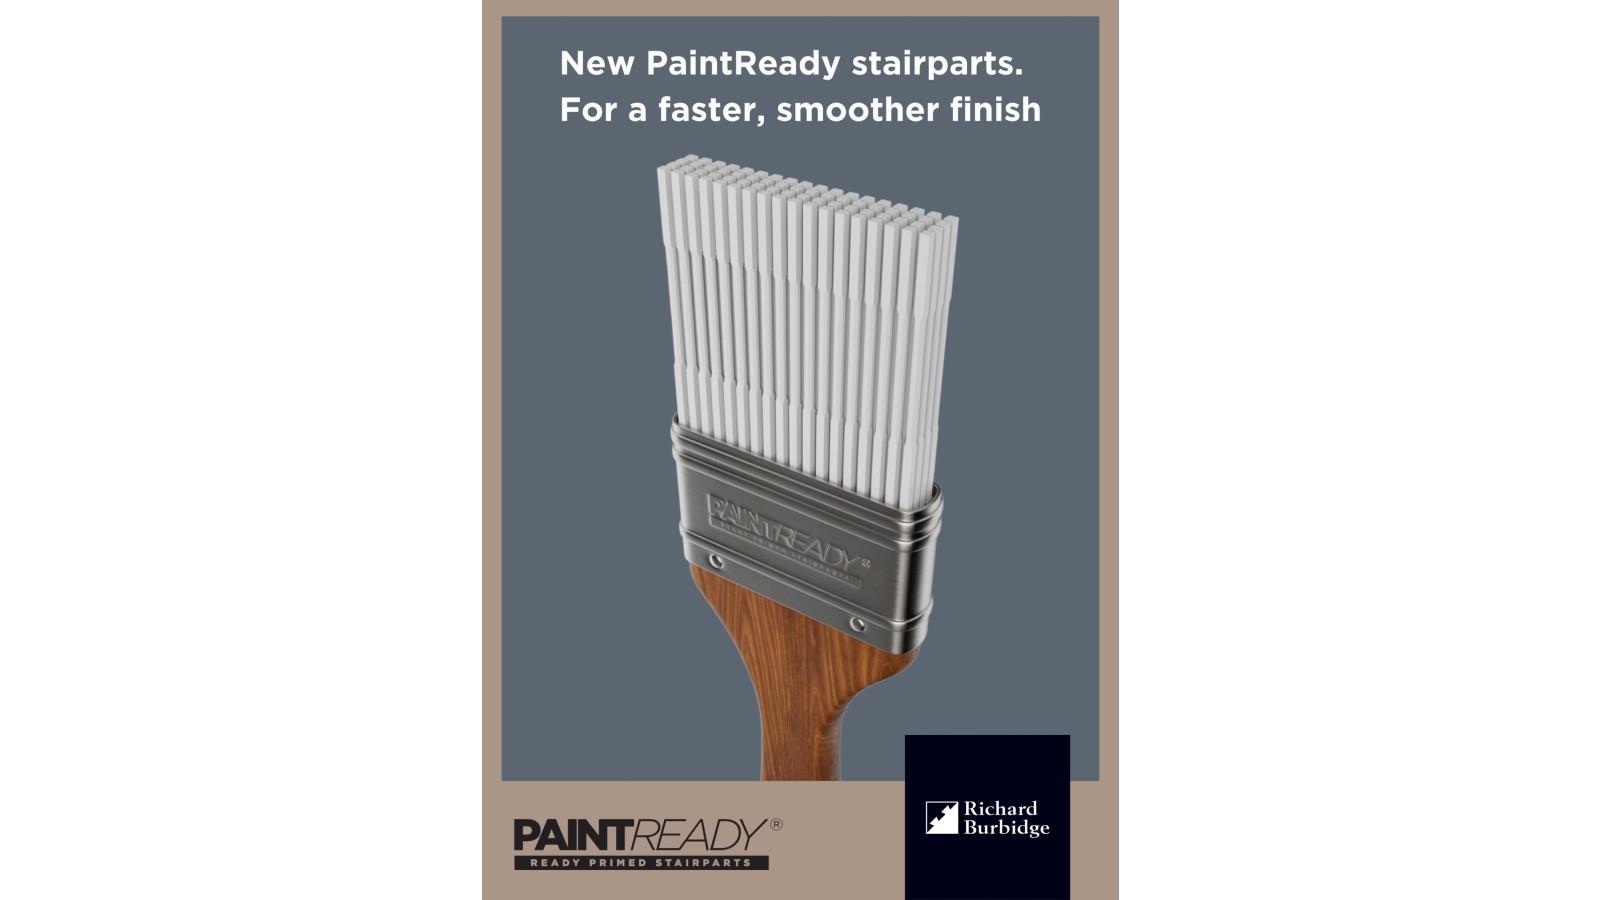 Manufacturer of stairparts, Richard Burbidge, launches new PaintReady collection image